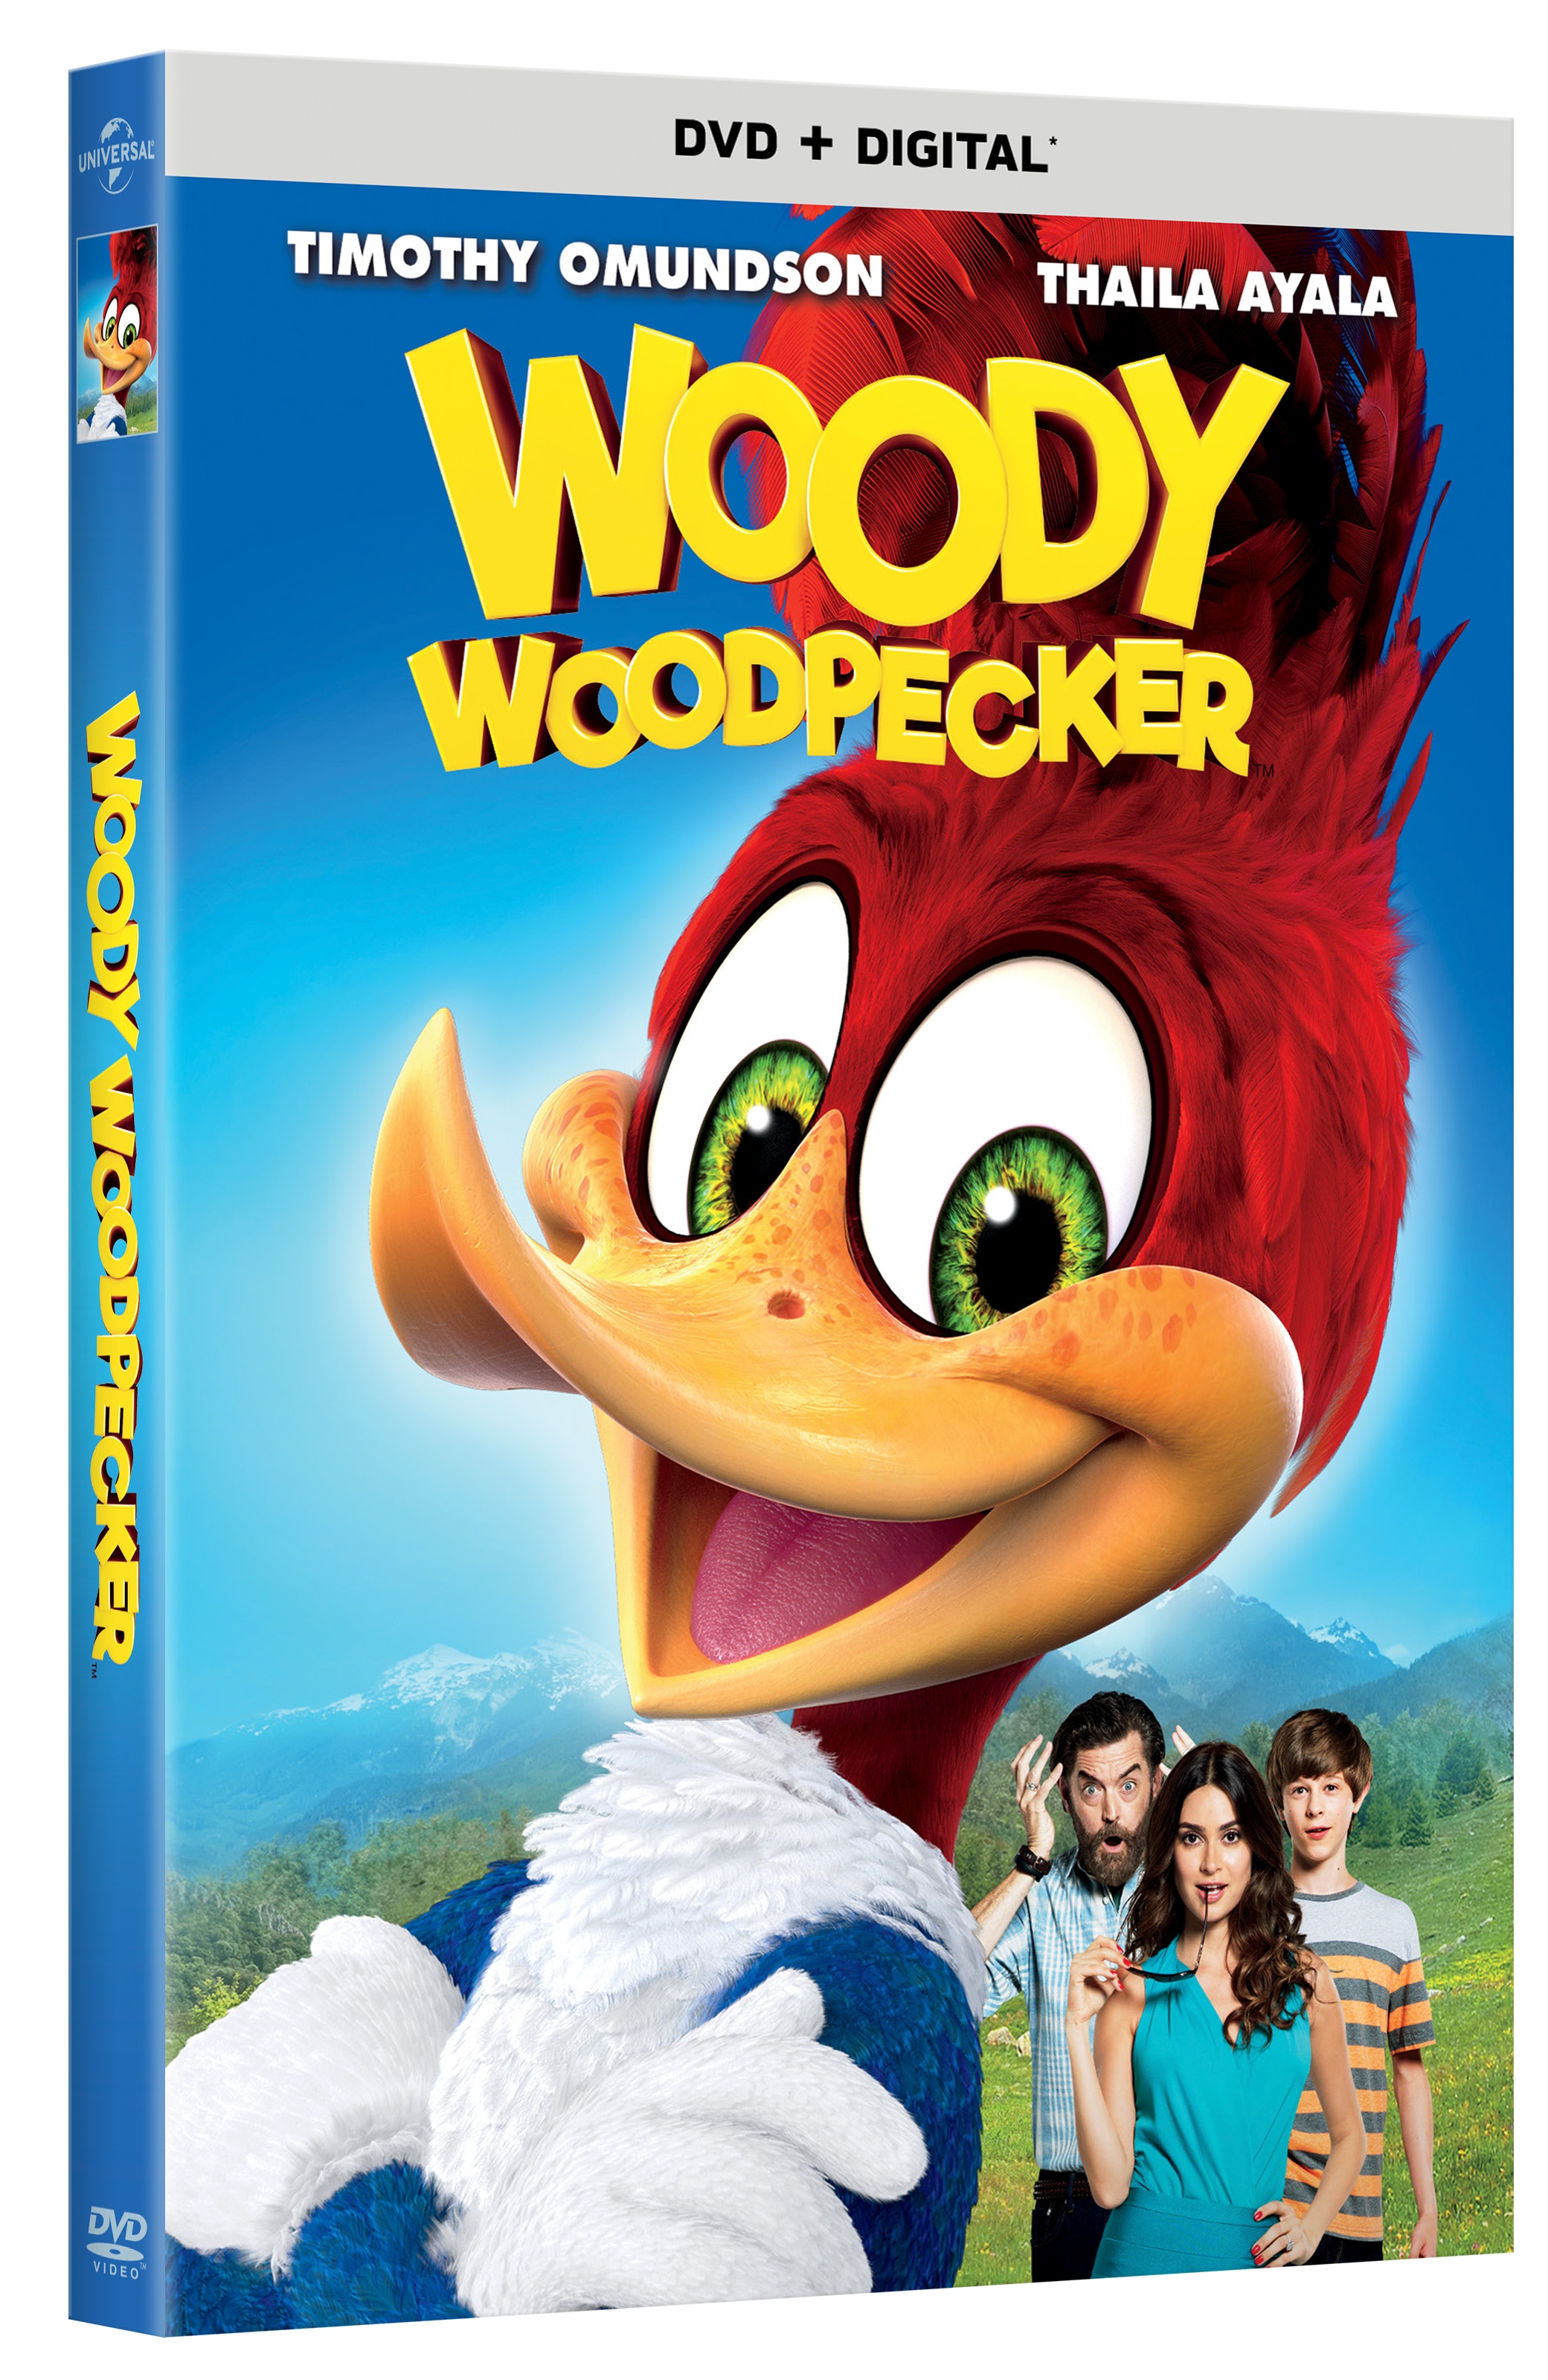 Media From the Heart by Ruth Hill | “Woody Woodpecker” Movie Review ...